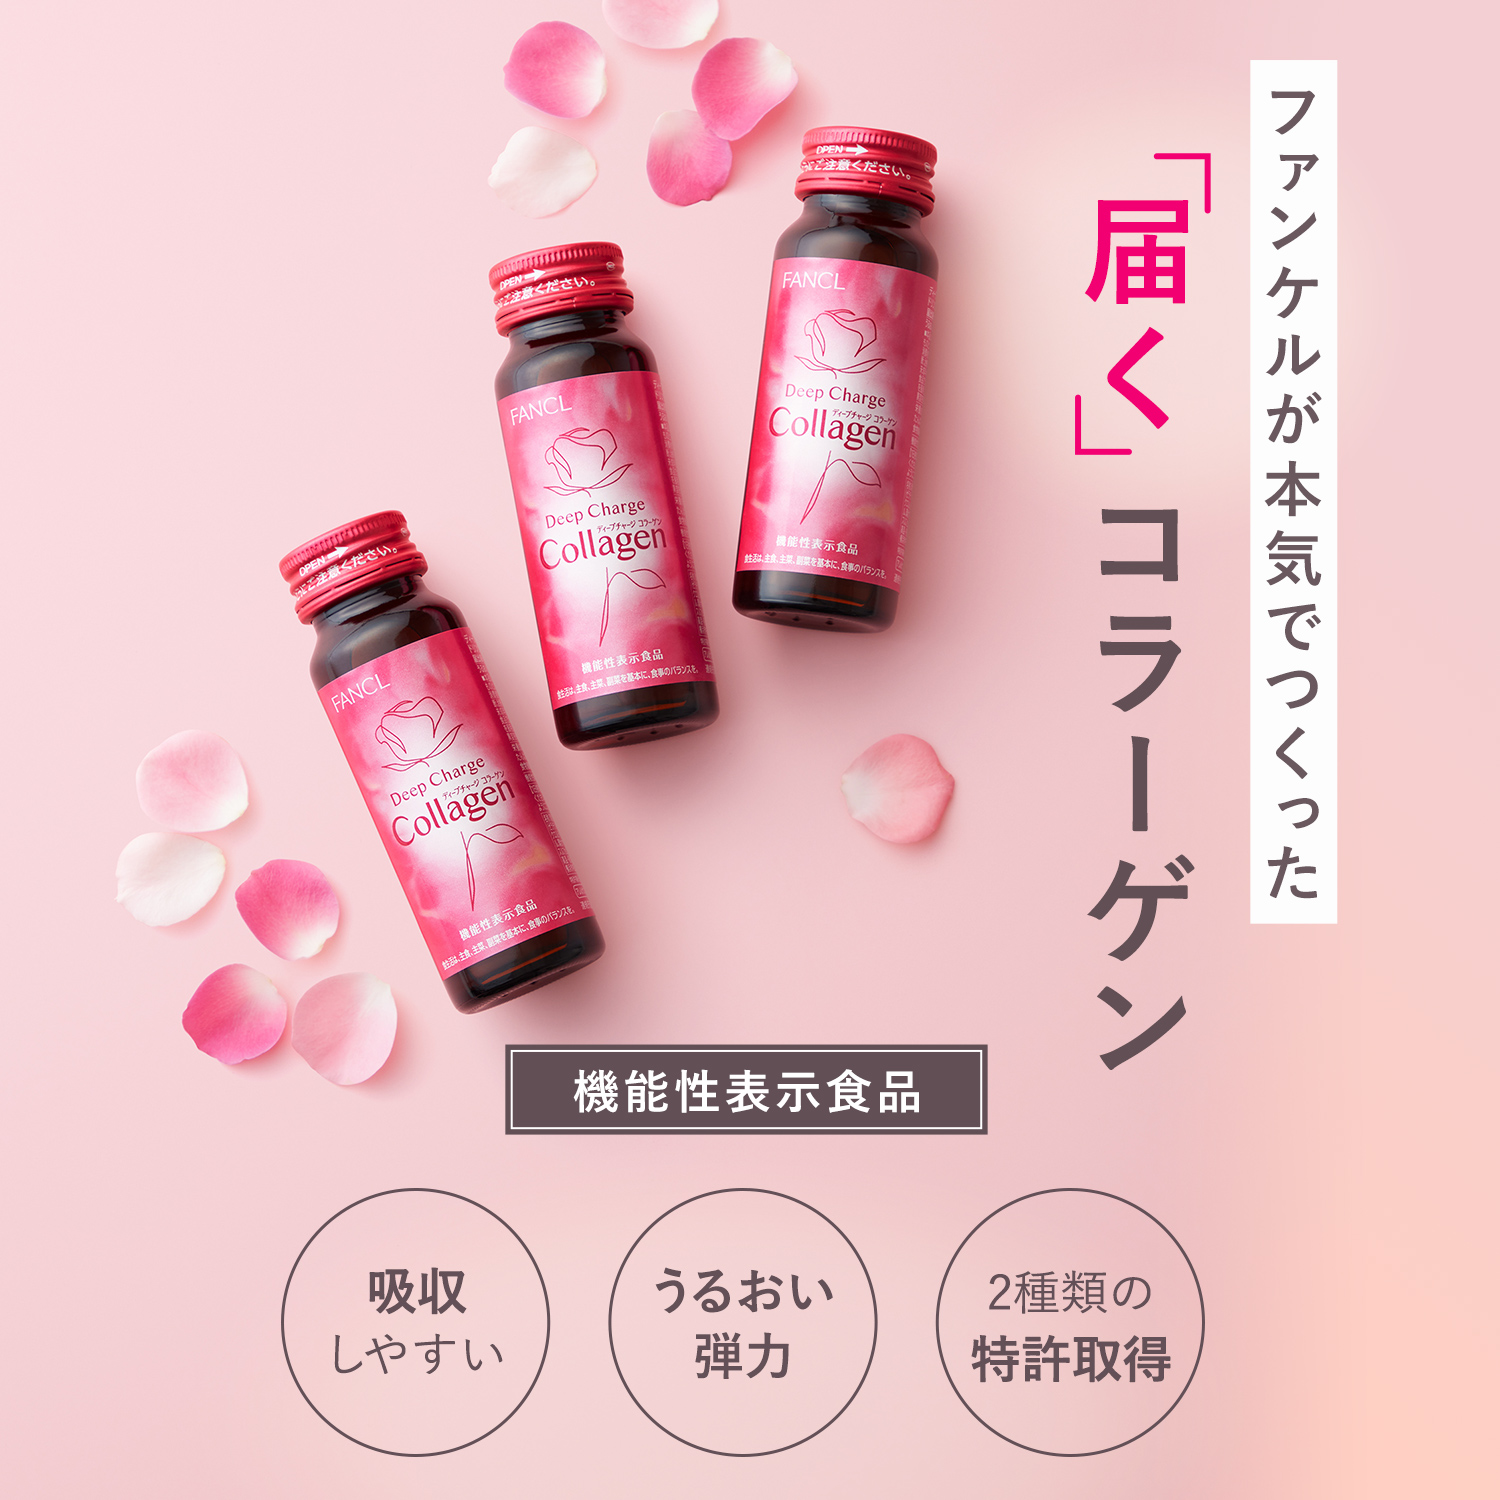  deep Charge collagen drink functionality display food 10 day minute collagen drink beauty drink vitamin c fish collagen Fancl FANCL official 